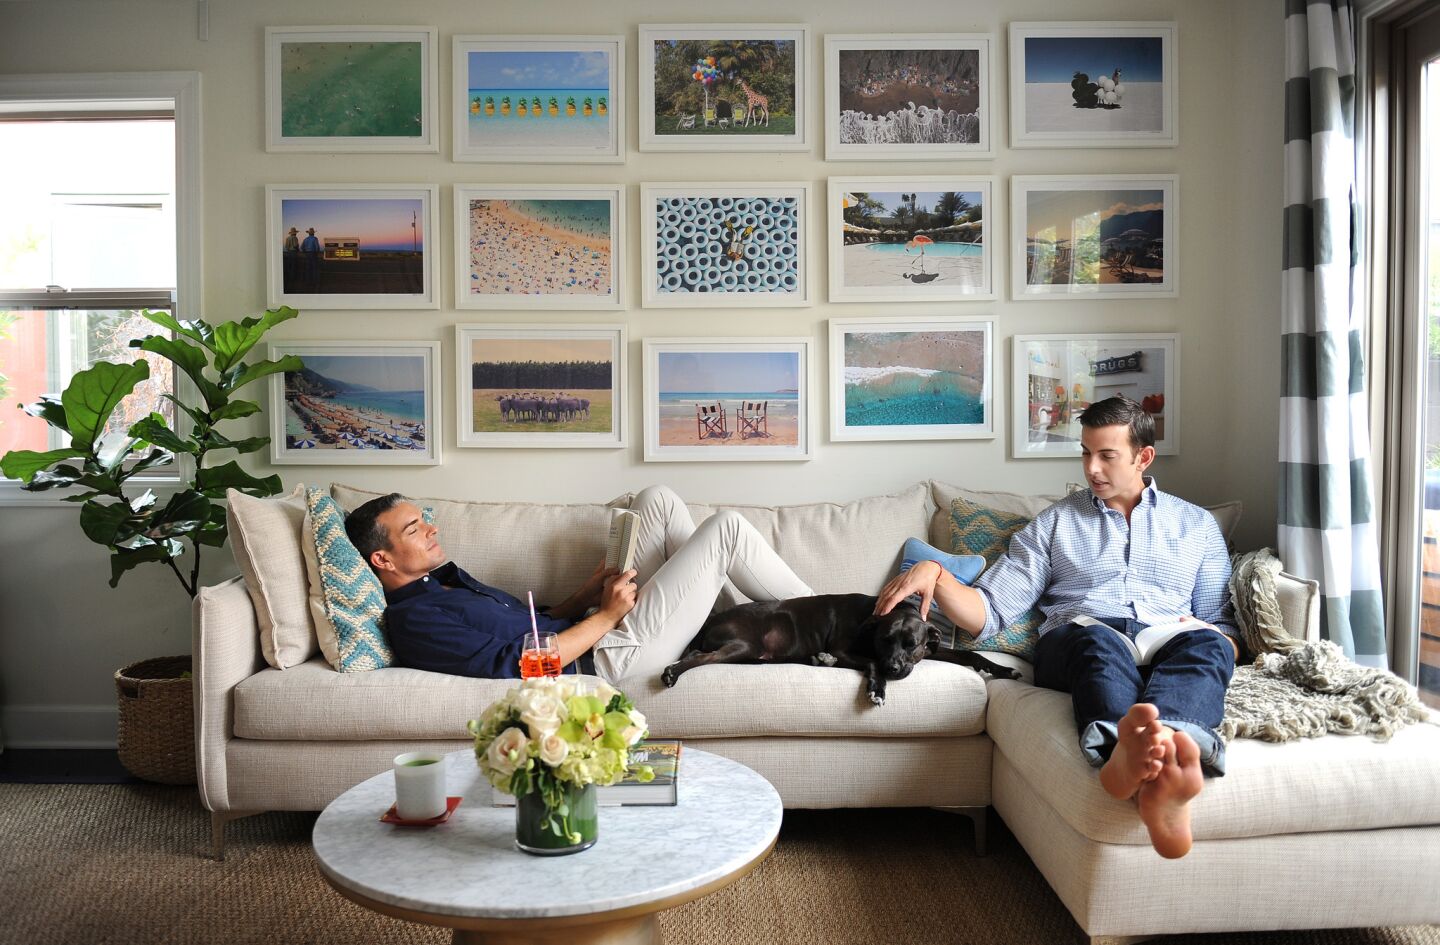 Gray Malin, left, Jeff Richardson and Stella kick back on a sectional sofa from the Joneses L.A. The curtains are from Pottery Barn, the table from West Elm and the fiddle leaf fig tree from Mickey Hargitay Plants. The photographs are Malin's.